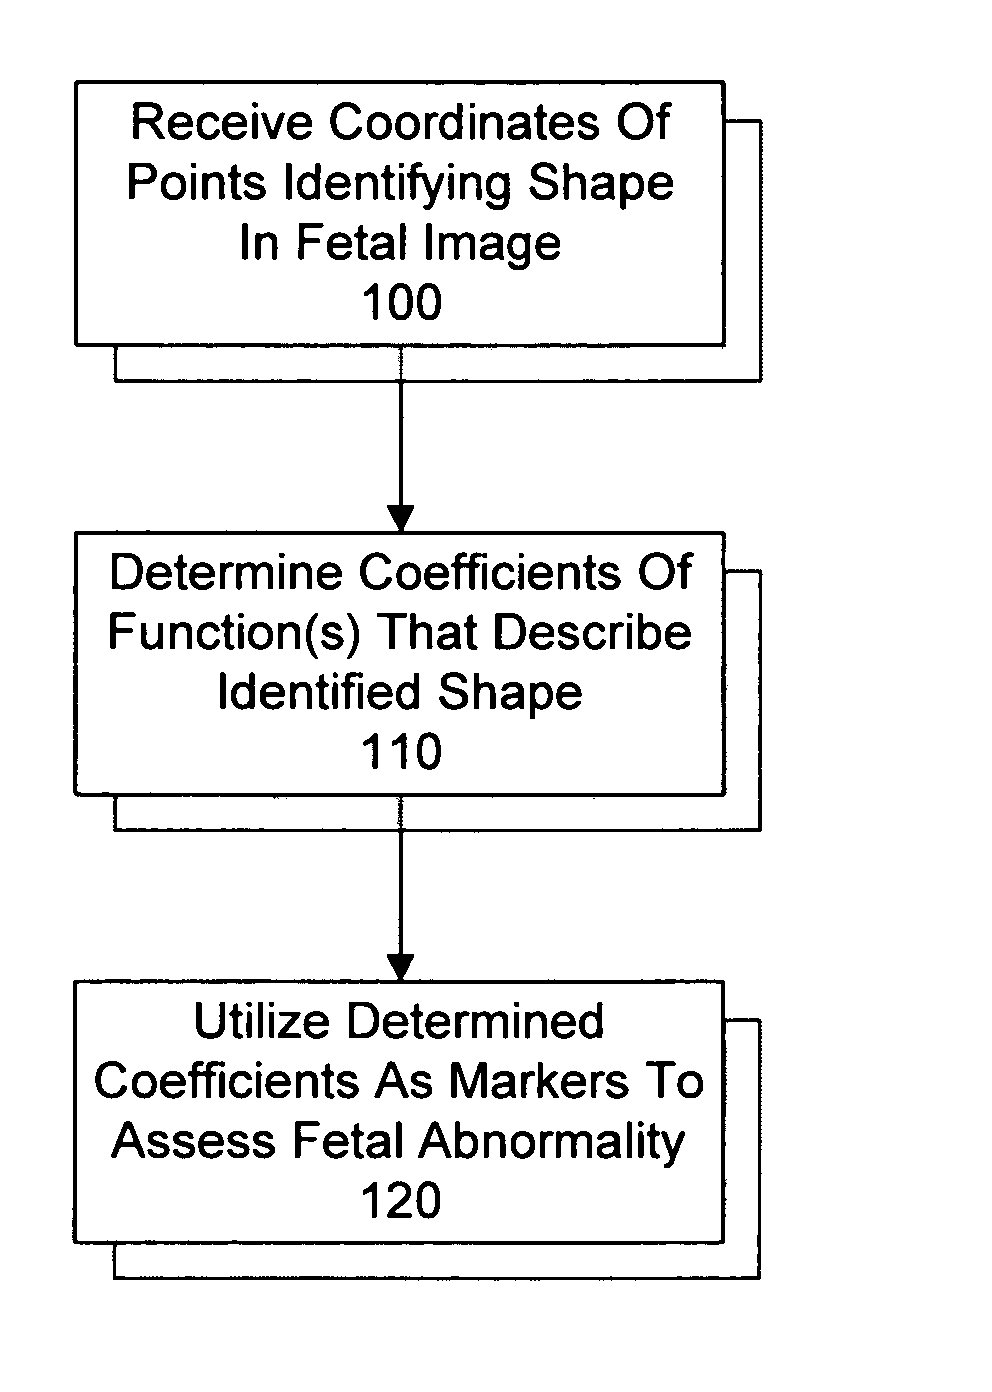 System and method for utilizing shape analysis to assess fetal abnormality